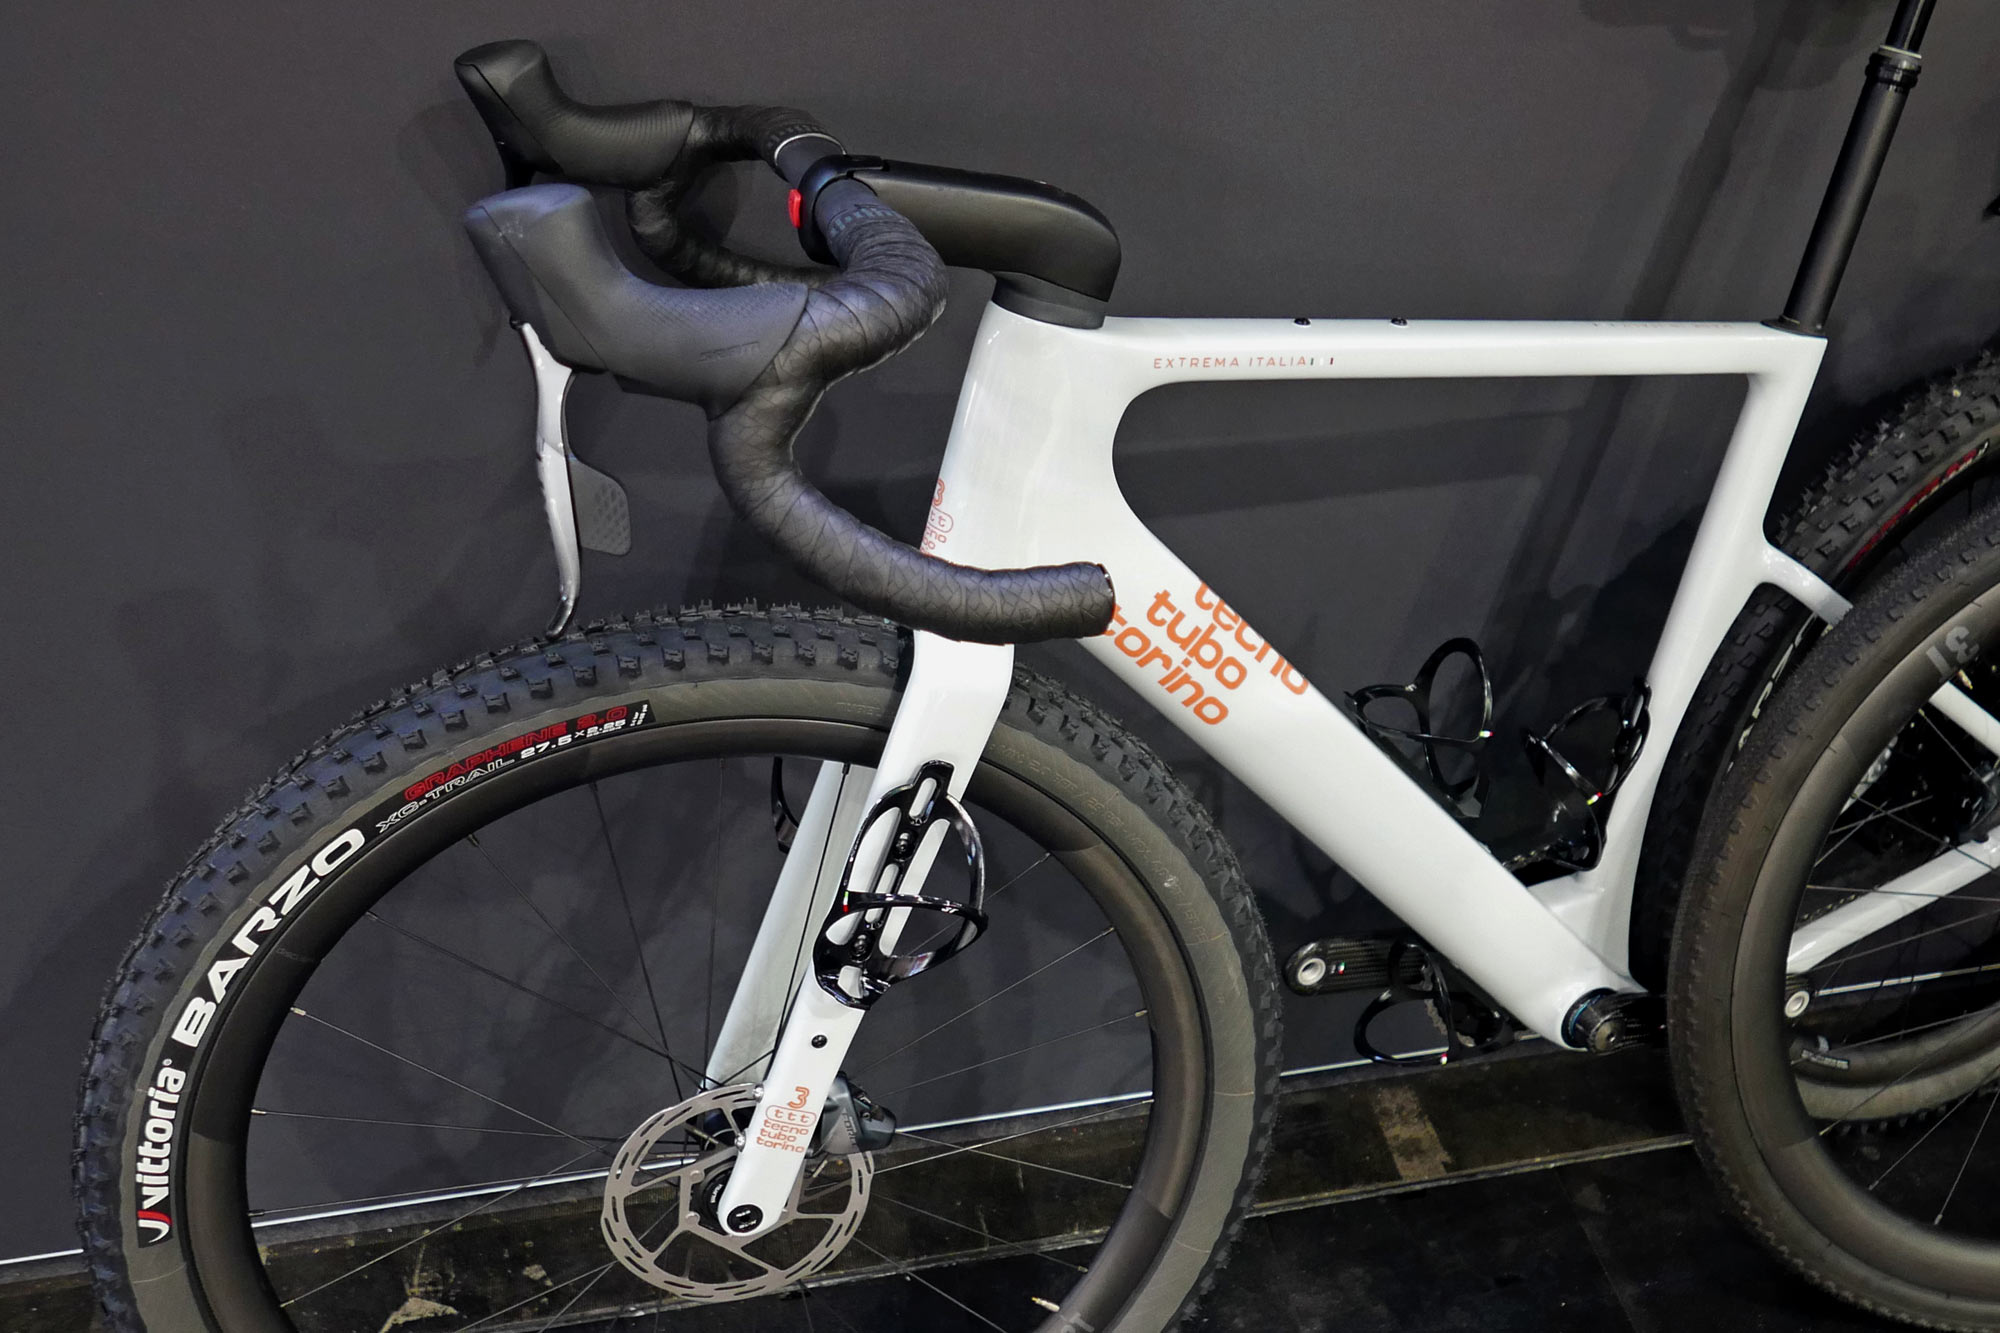 2023 3T Exploro Italia gravel bikes get fully internal cable routing, made-in-Italy, detail